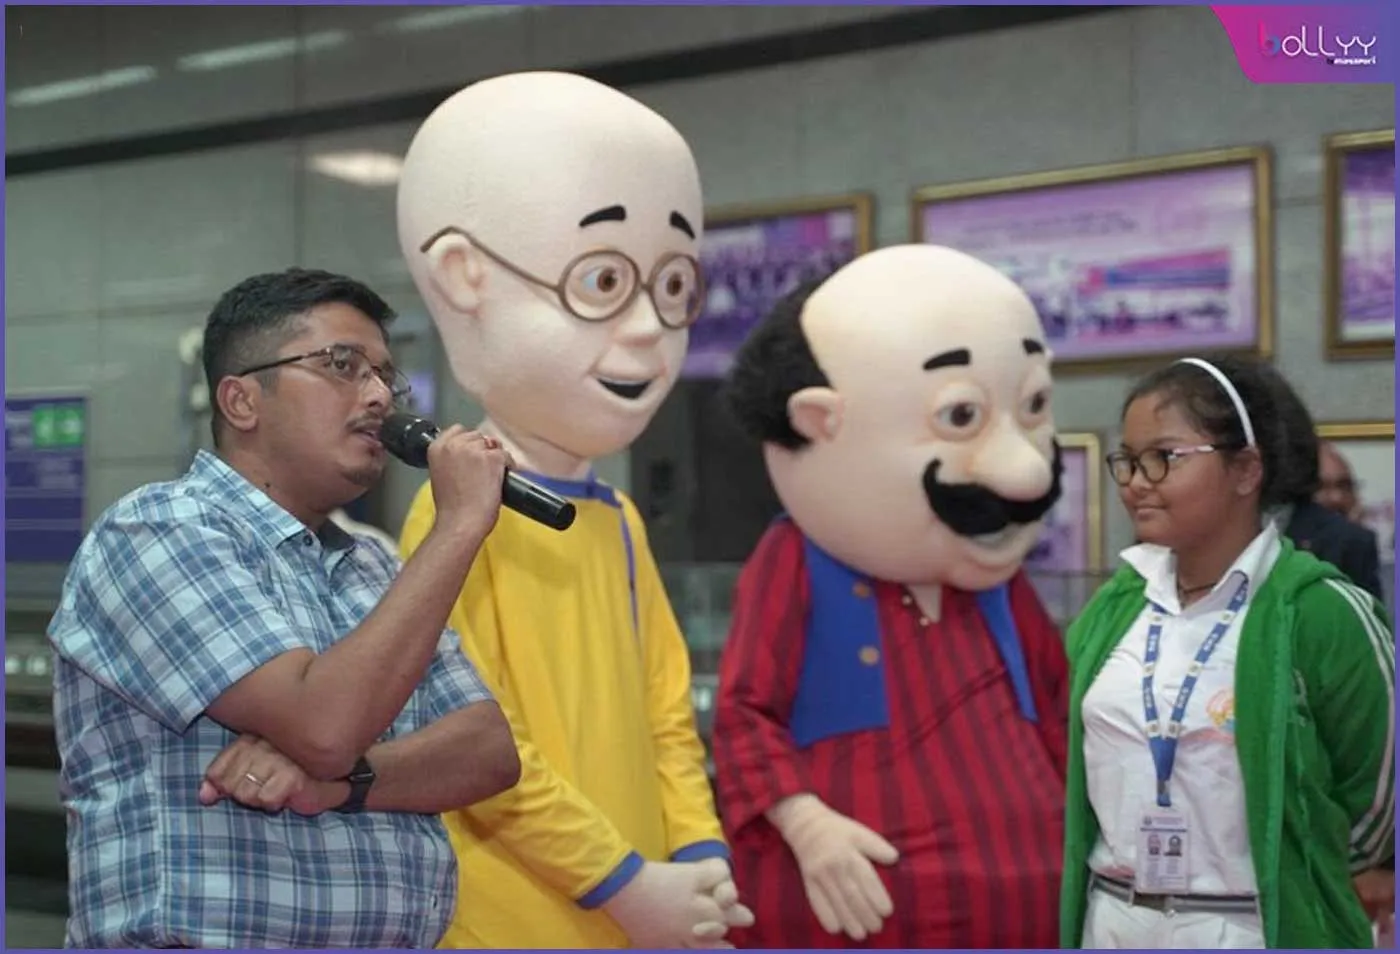 Nickelodeon teams up with Delhi Metro for Children’s Day campaign